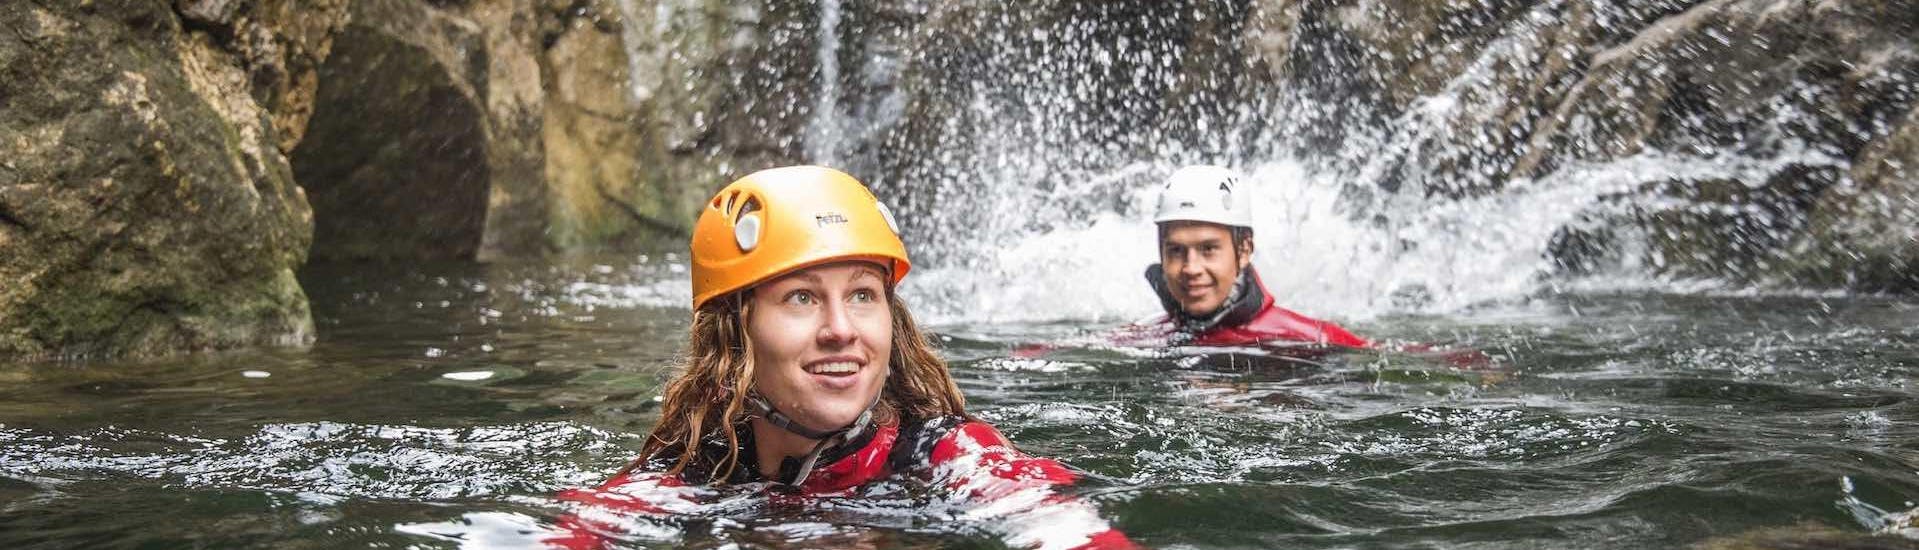 2 participants of the canyoning tour in the Almbachklamm of Zell am See - Fun Tour swim in the water of a natural pool with Adventure Service Outdoorsports.